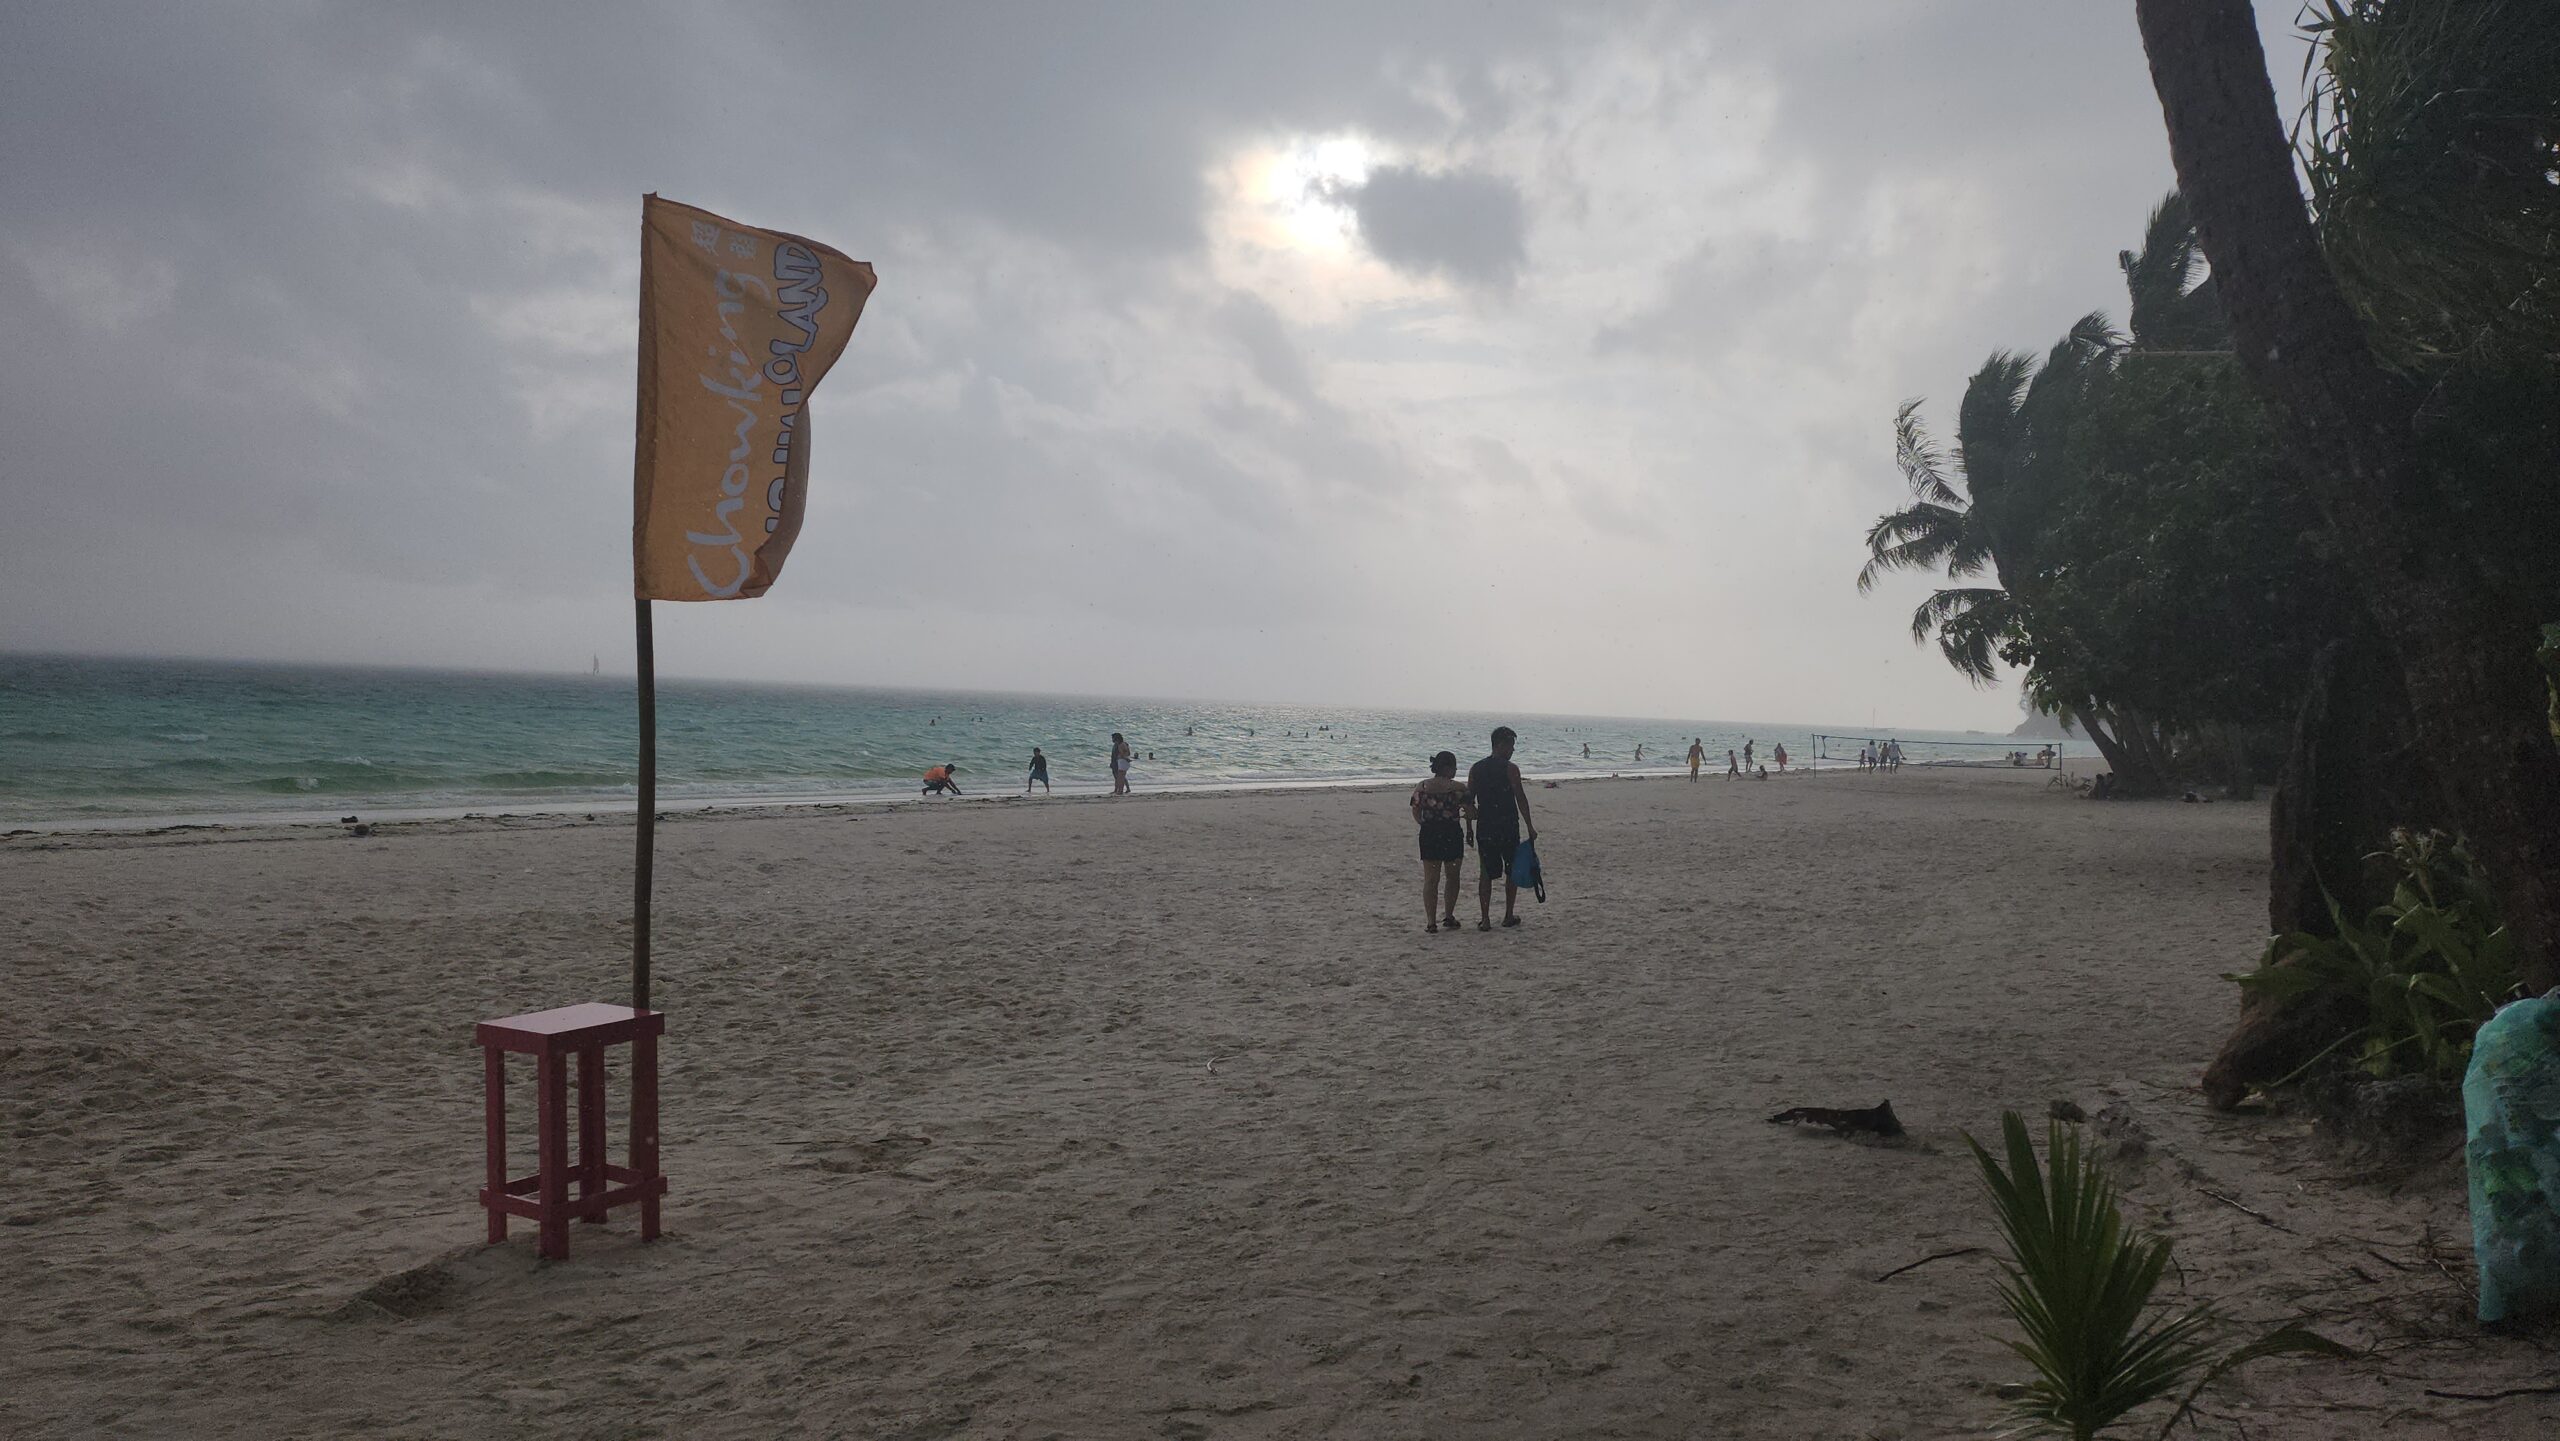 Southwest monsoon prompts suspension of Boracay water sports, fishing, some trips